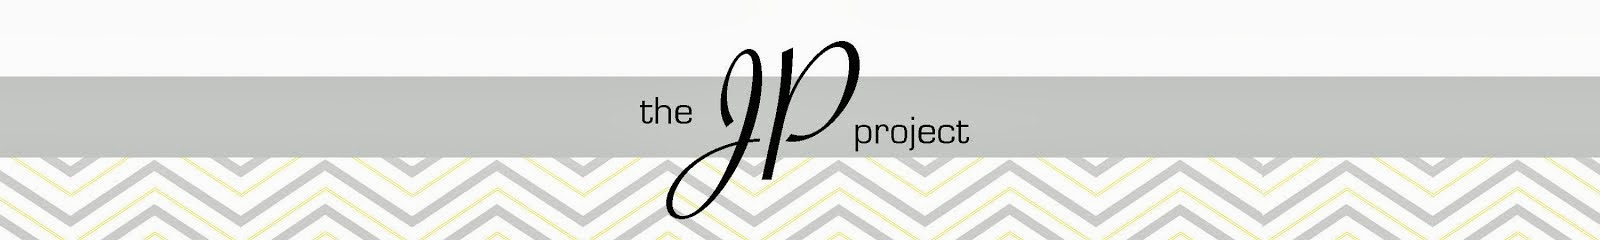 The JP Project